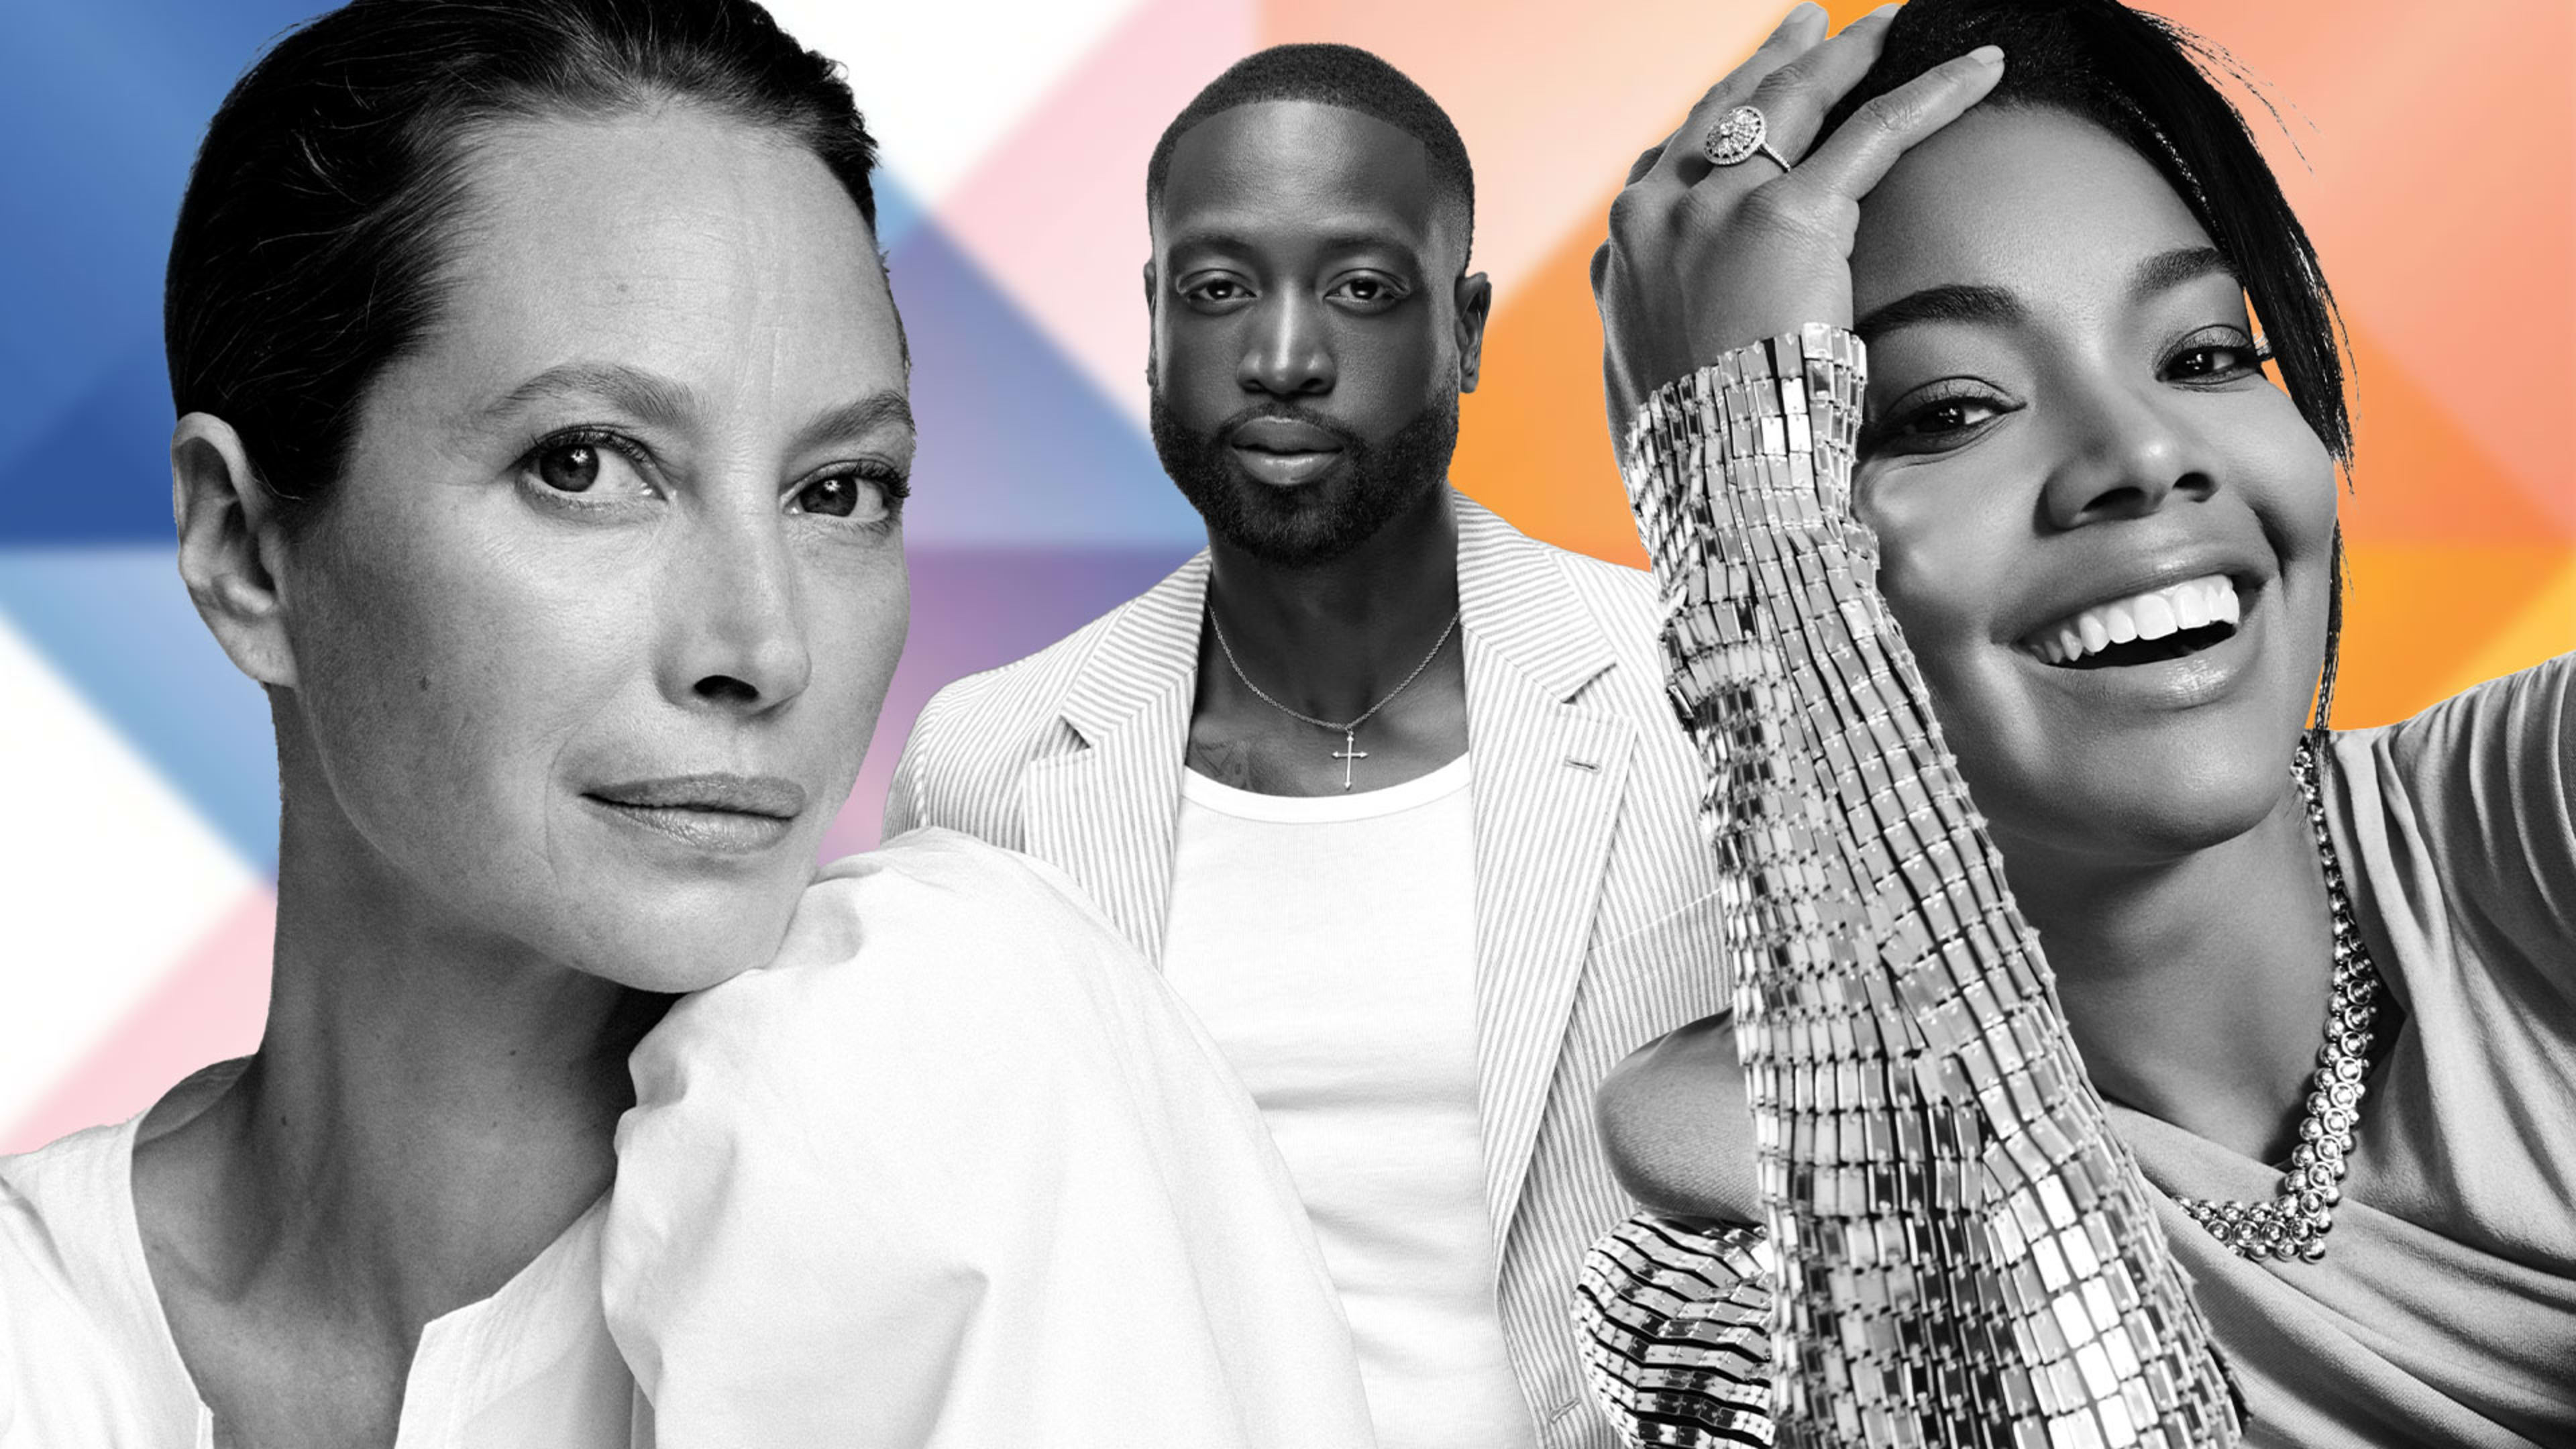 Gabrielle Union, Dwyane Wade, Christy Turlington Burns, and more join Fast Company’s Innovation Festival